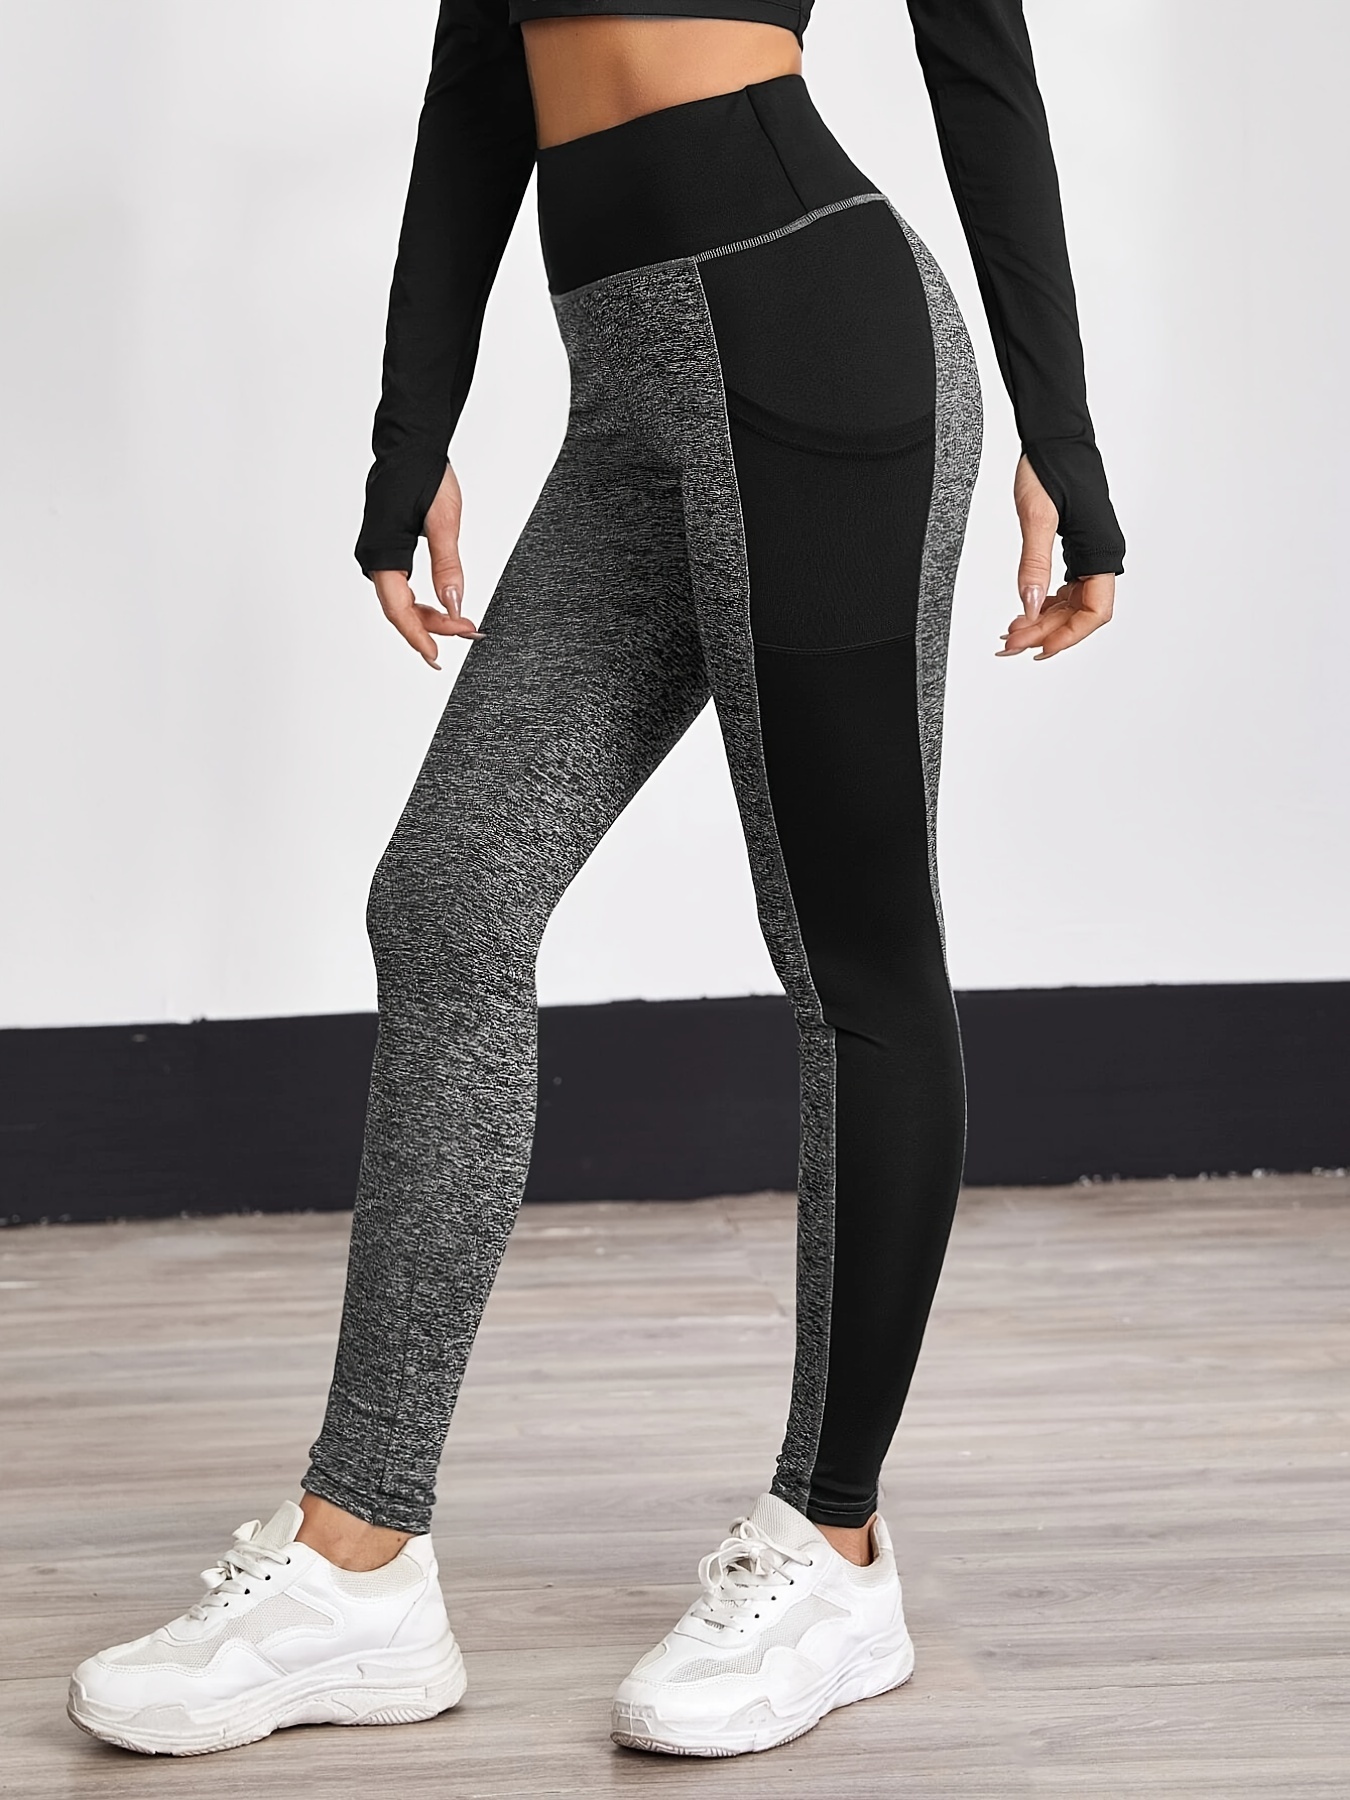  Workout Leggings for Women with Pockets,Women Seamless